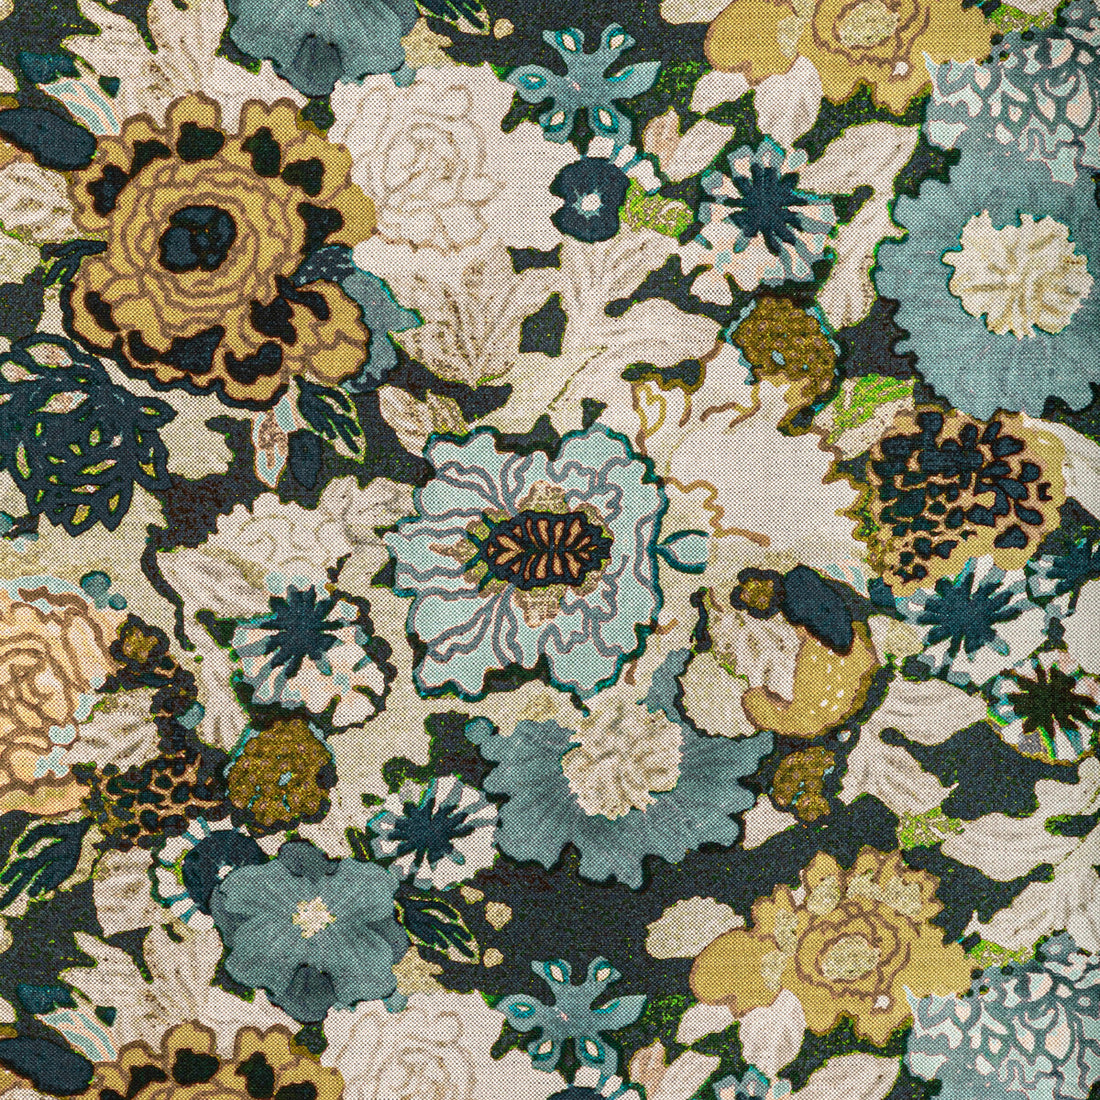 Arioso Print fabric in marine/citron color - pattern GWF-3774.450.0 - by Lee Jofa Modern in the Rhapsody collection